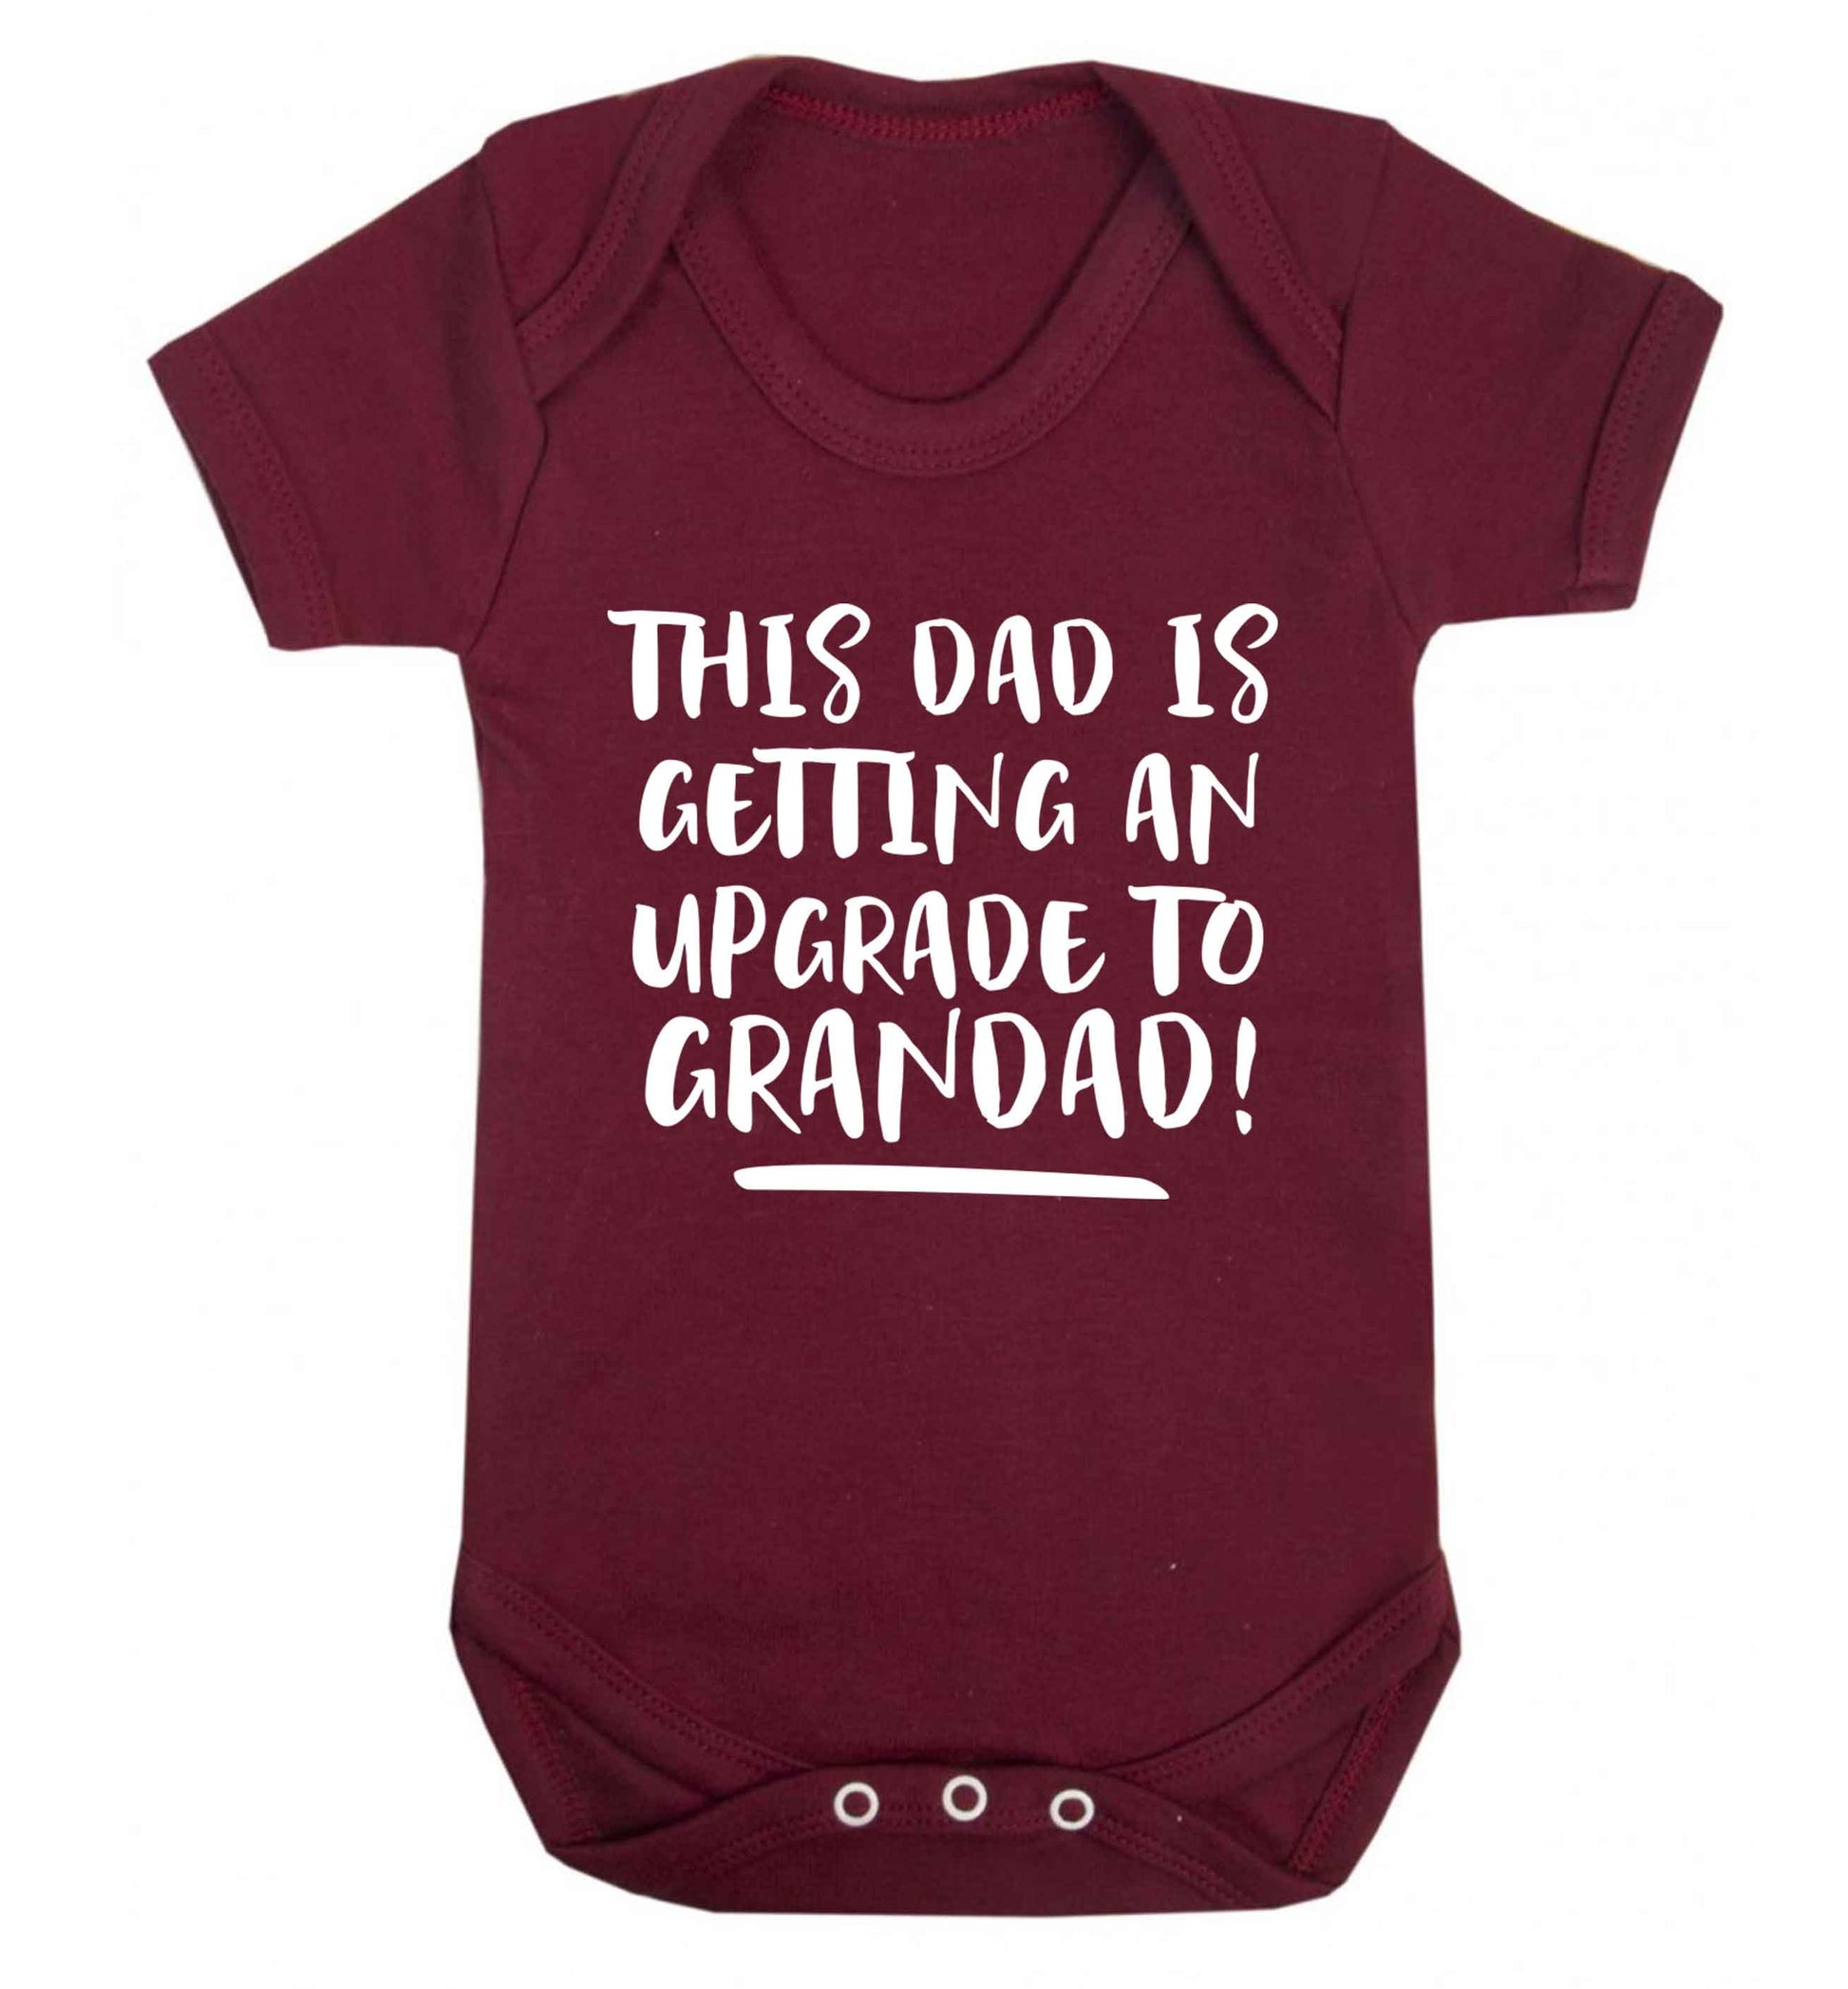 This dad is getting an upgrade to grandad! Baby Vest maroon 18-24 months